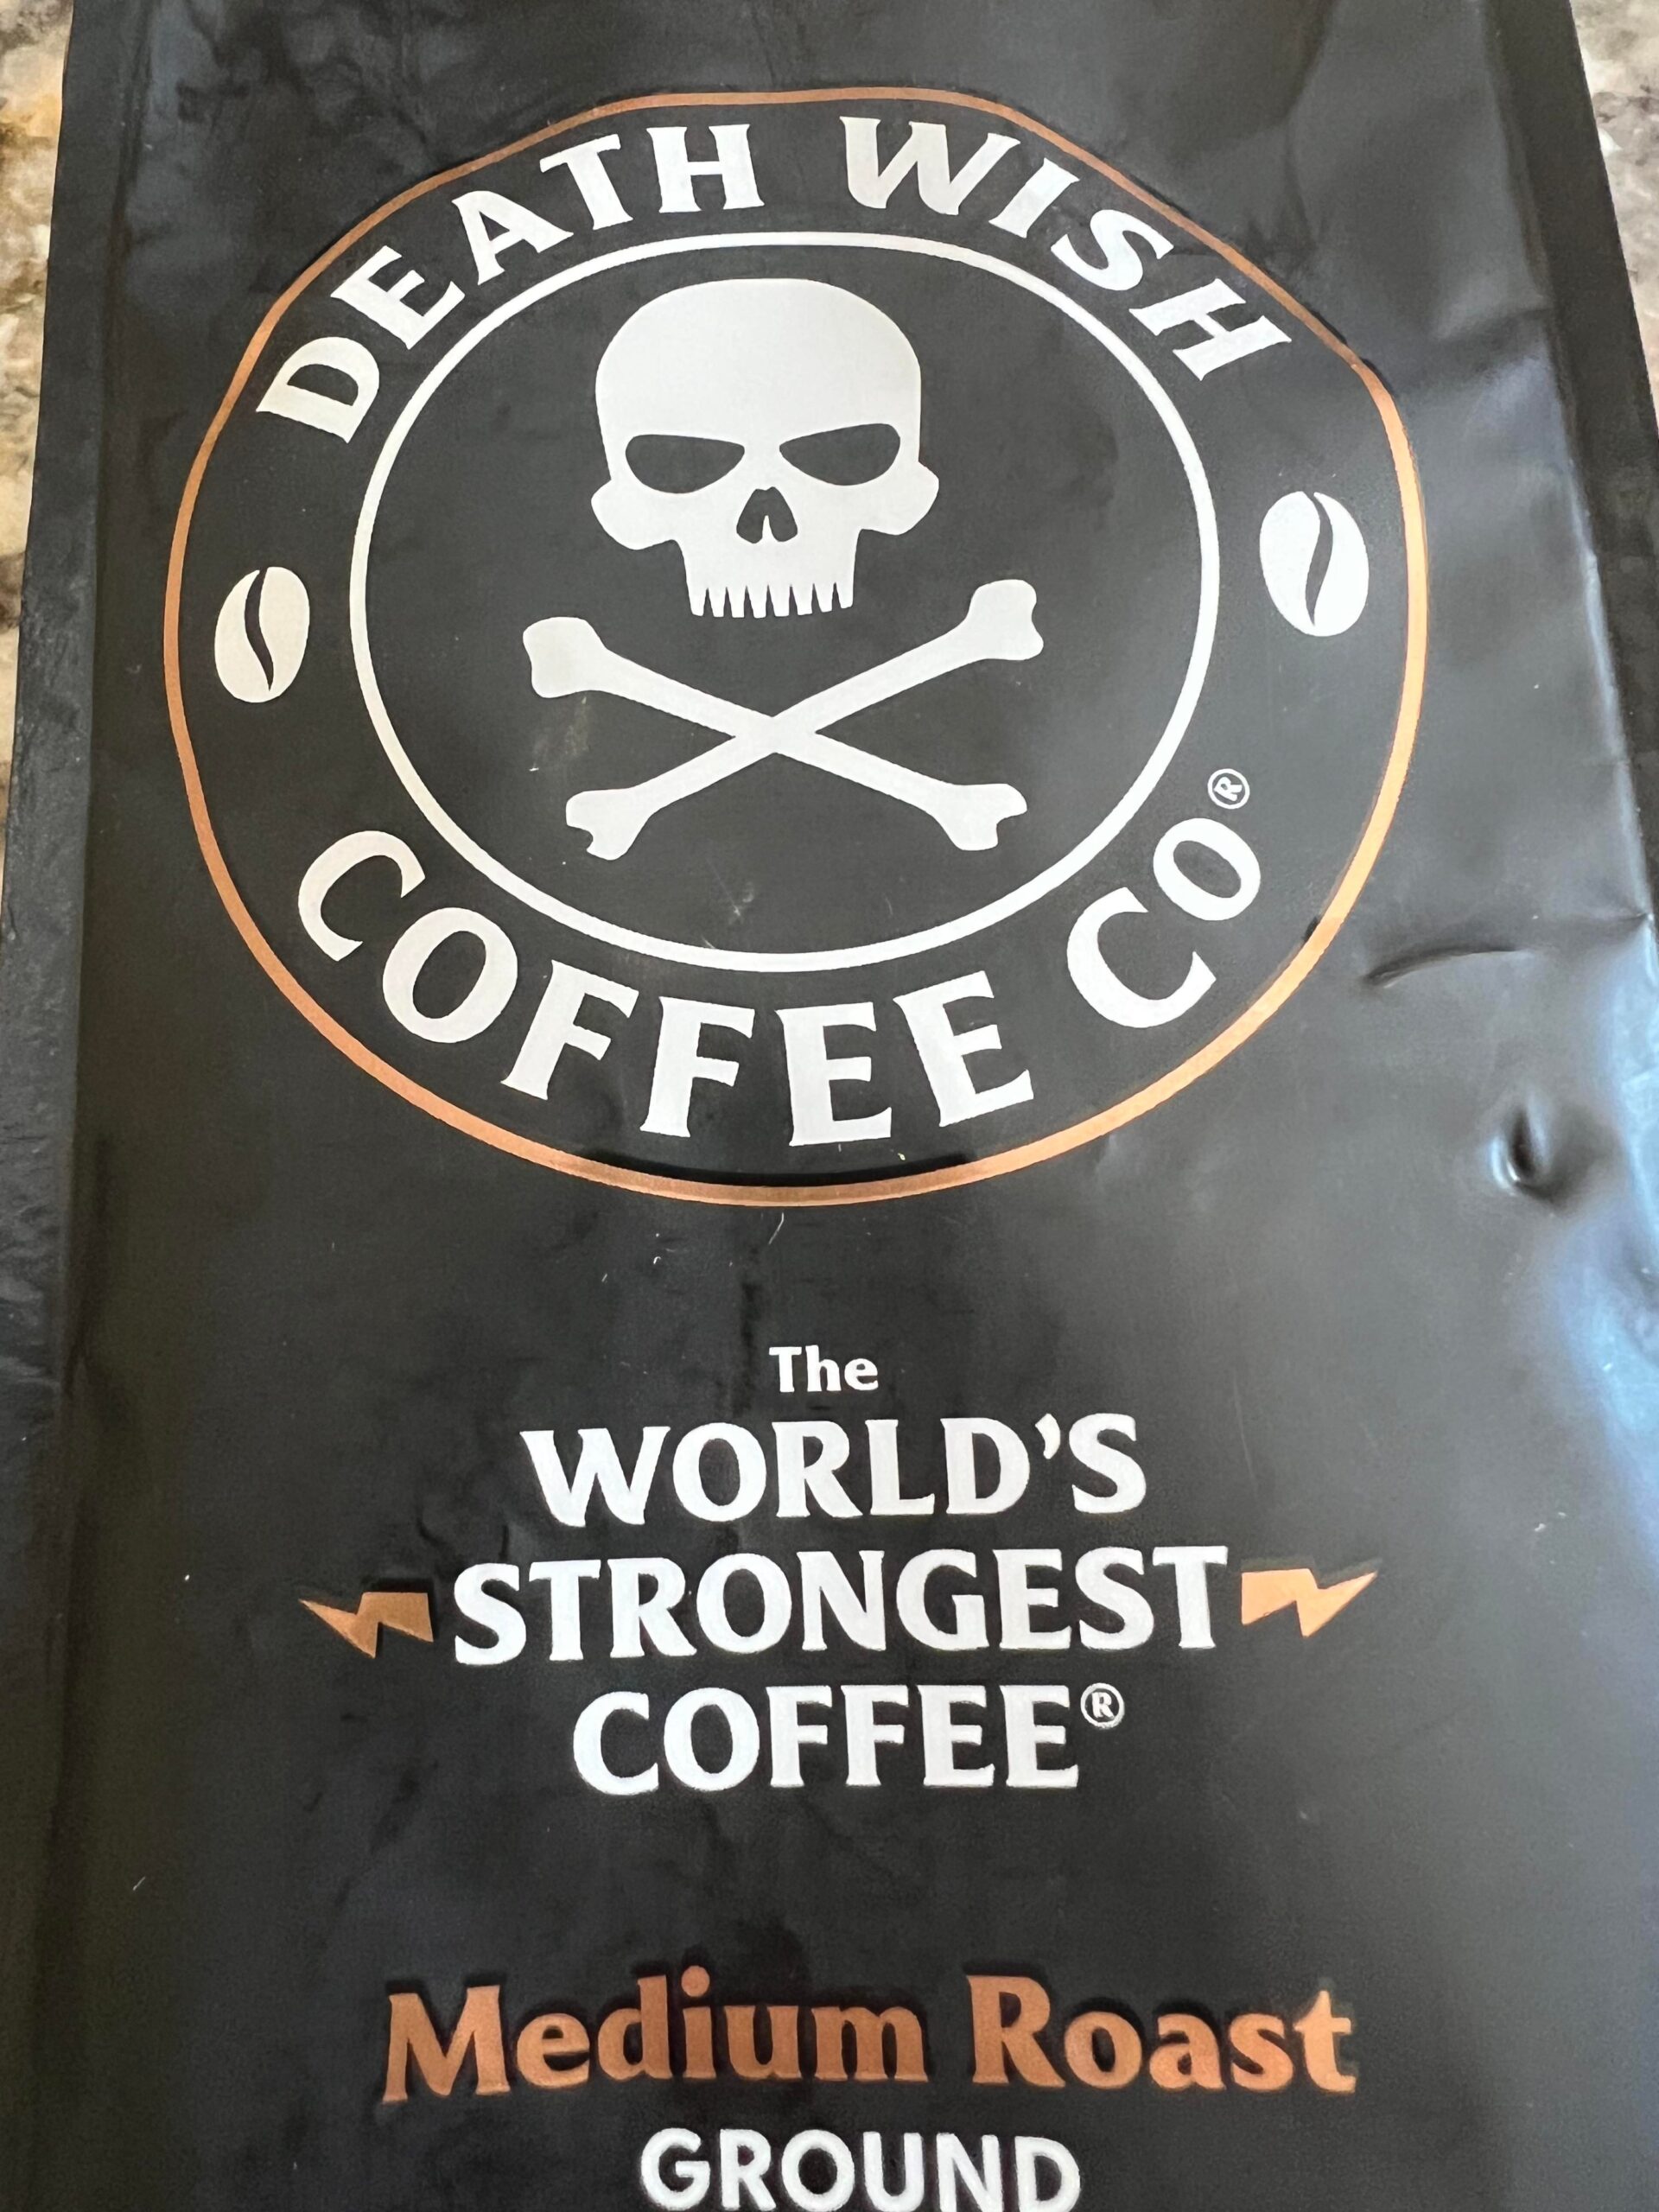 It Is The Best Coffee I Have Had #DeathWishCoffeePartner and #sponsored